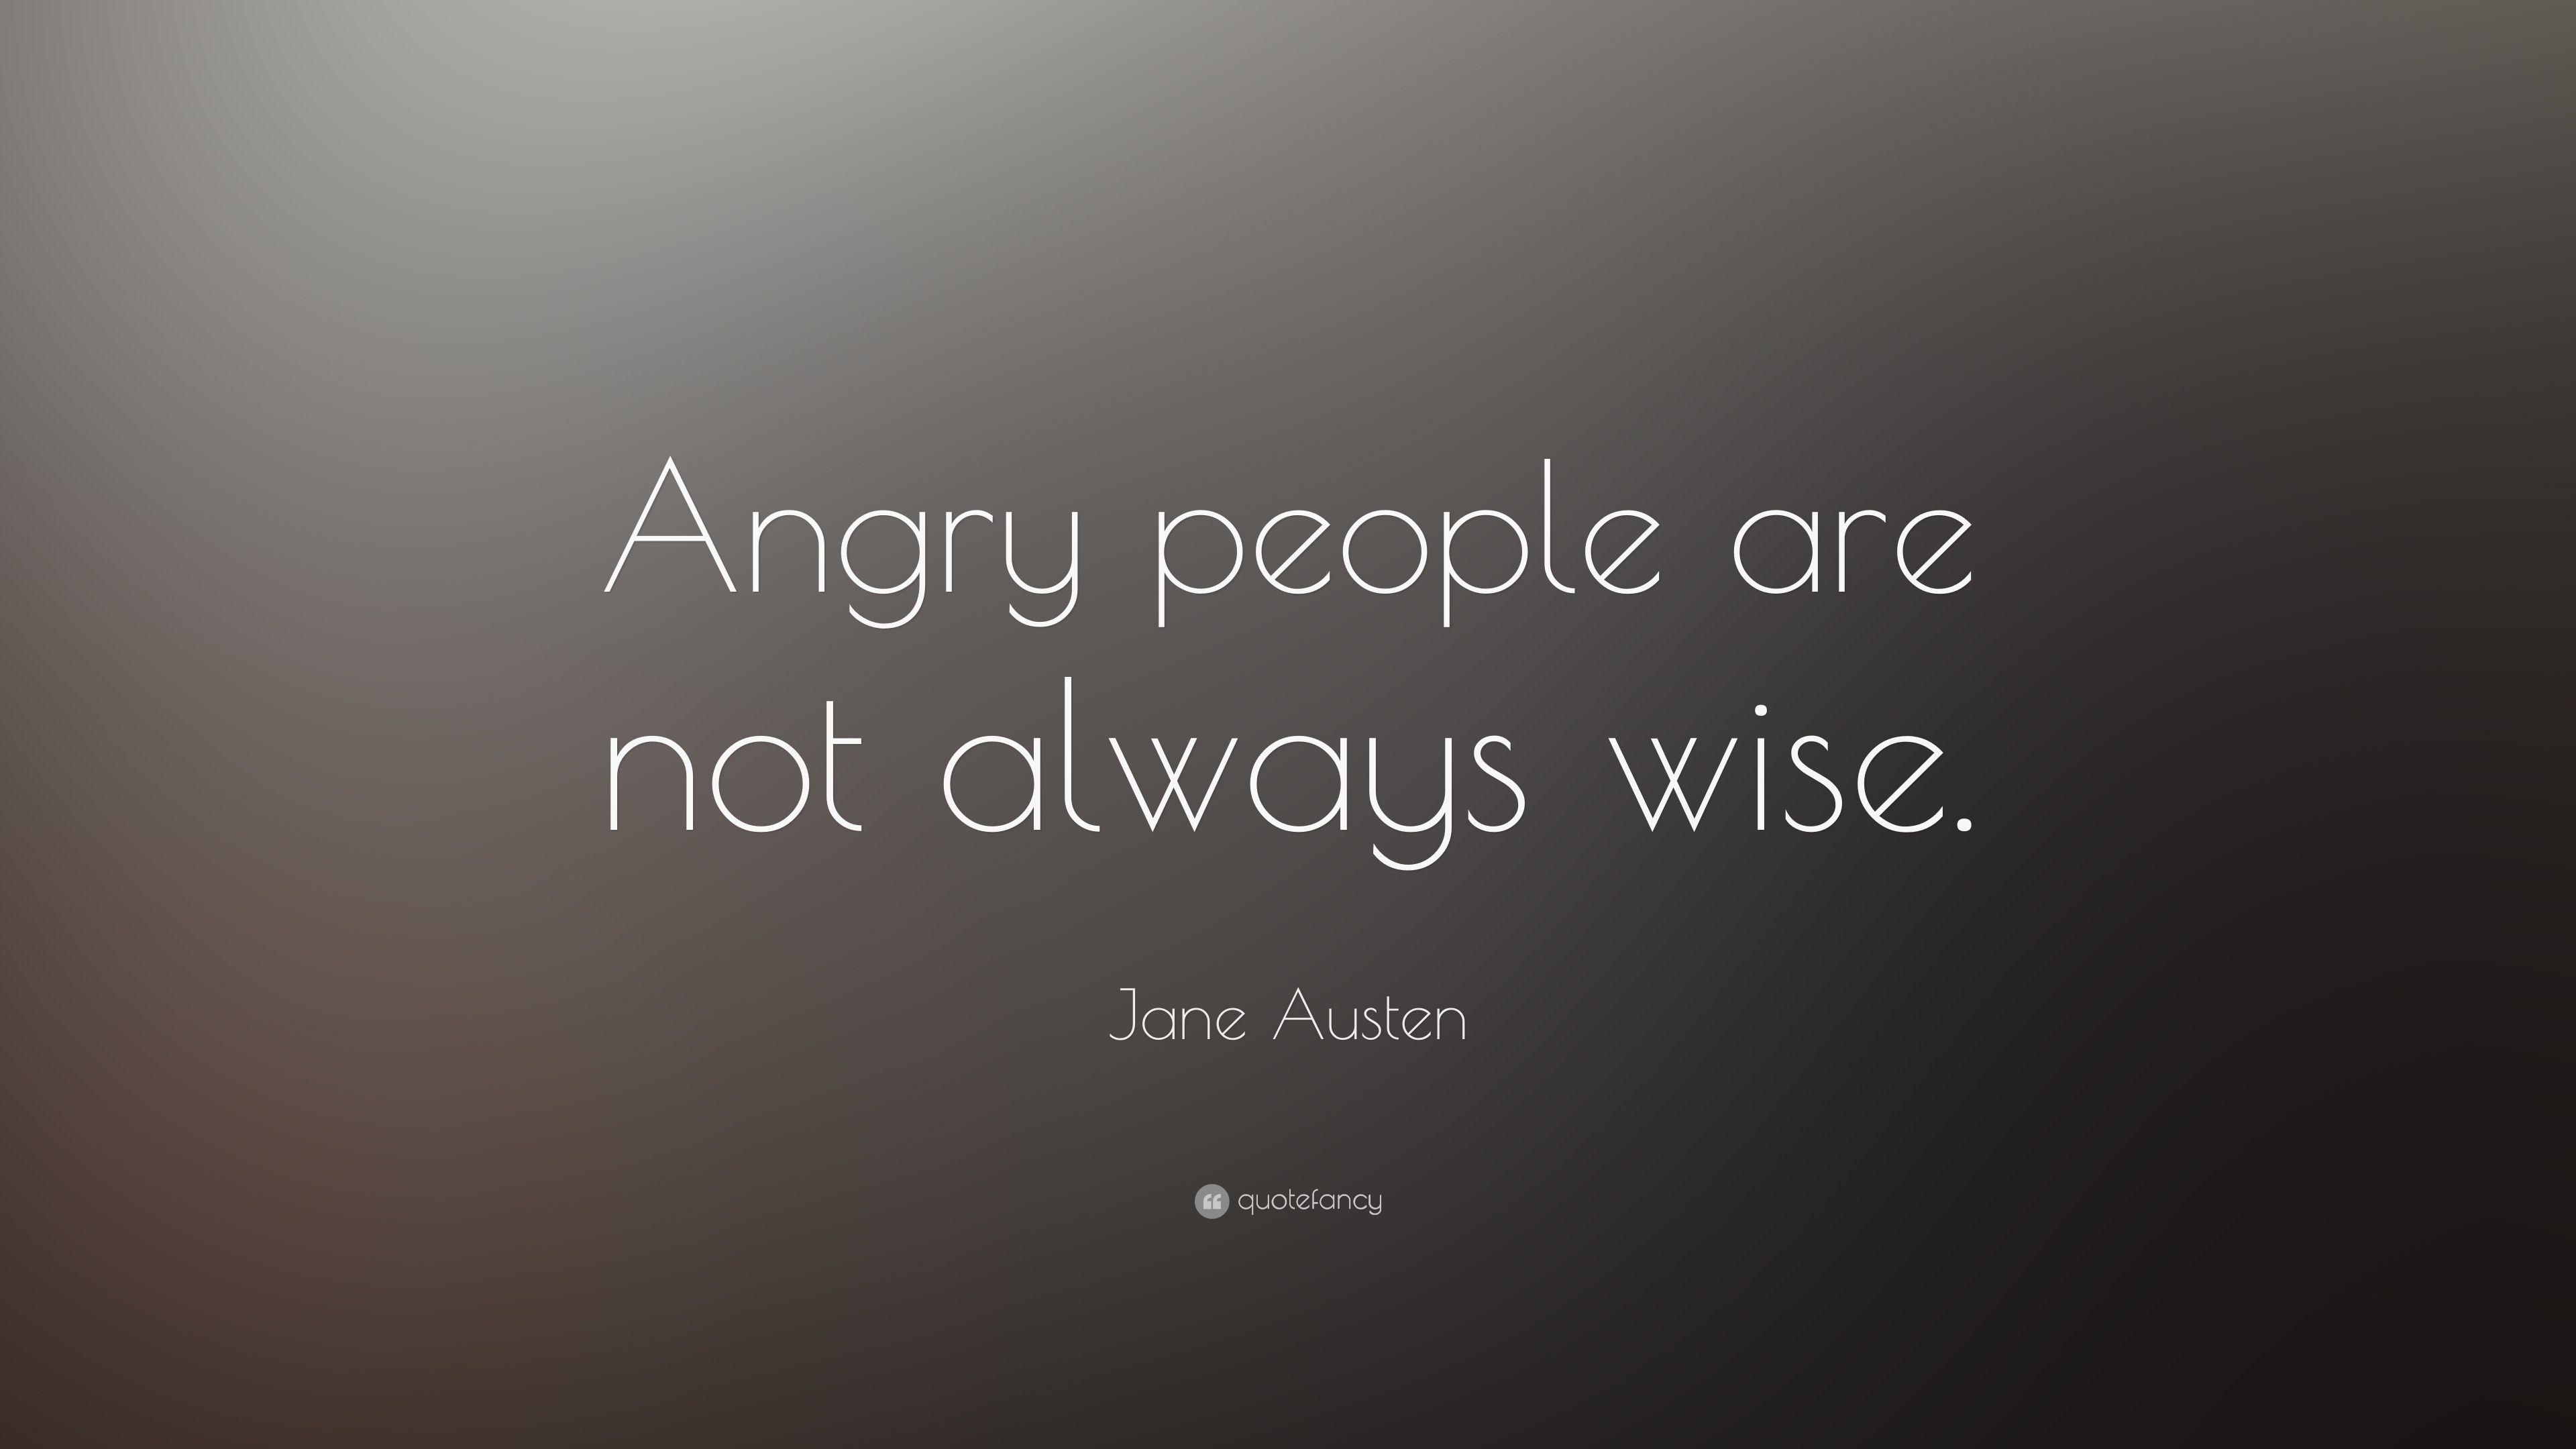 Jane Austen Quote: “Angry people are not always wise.” 13